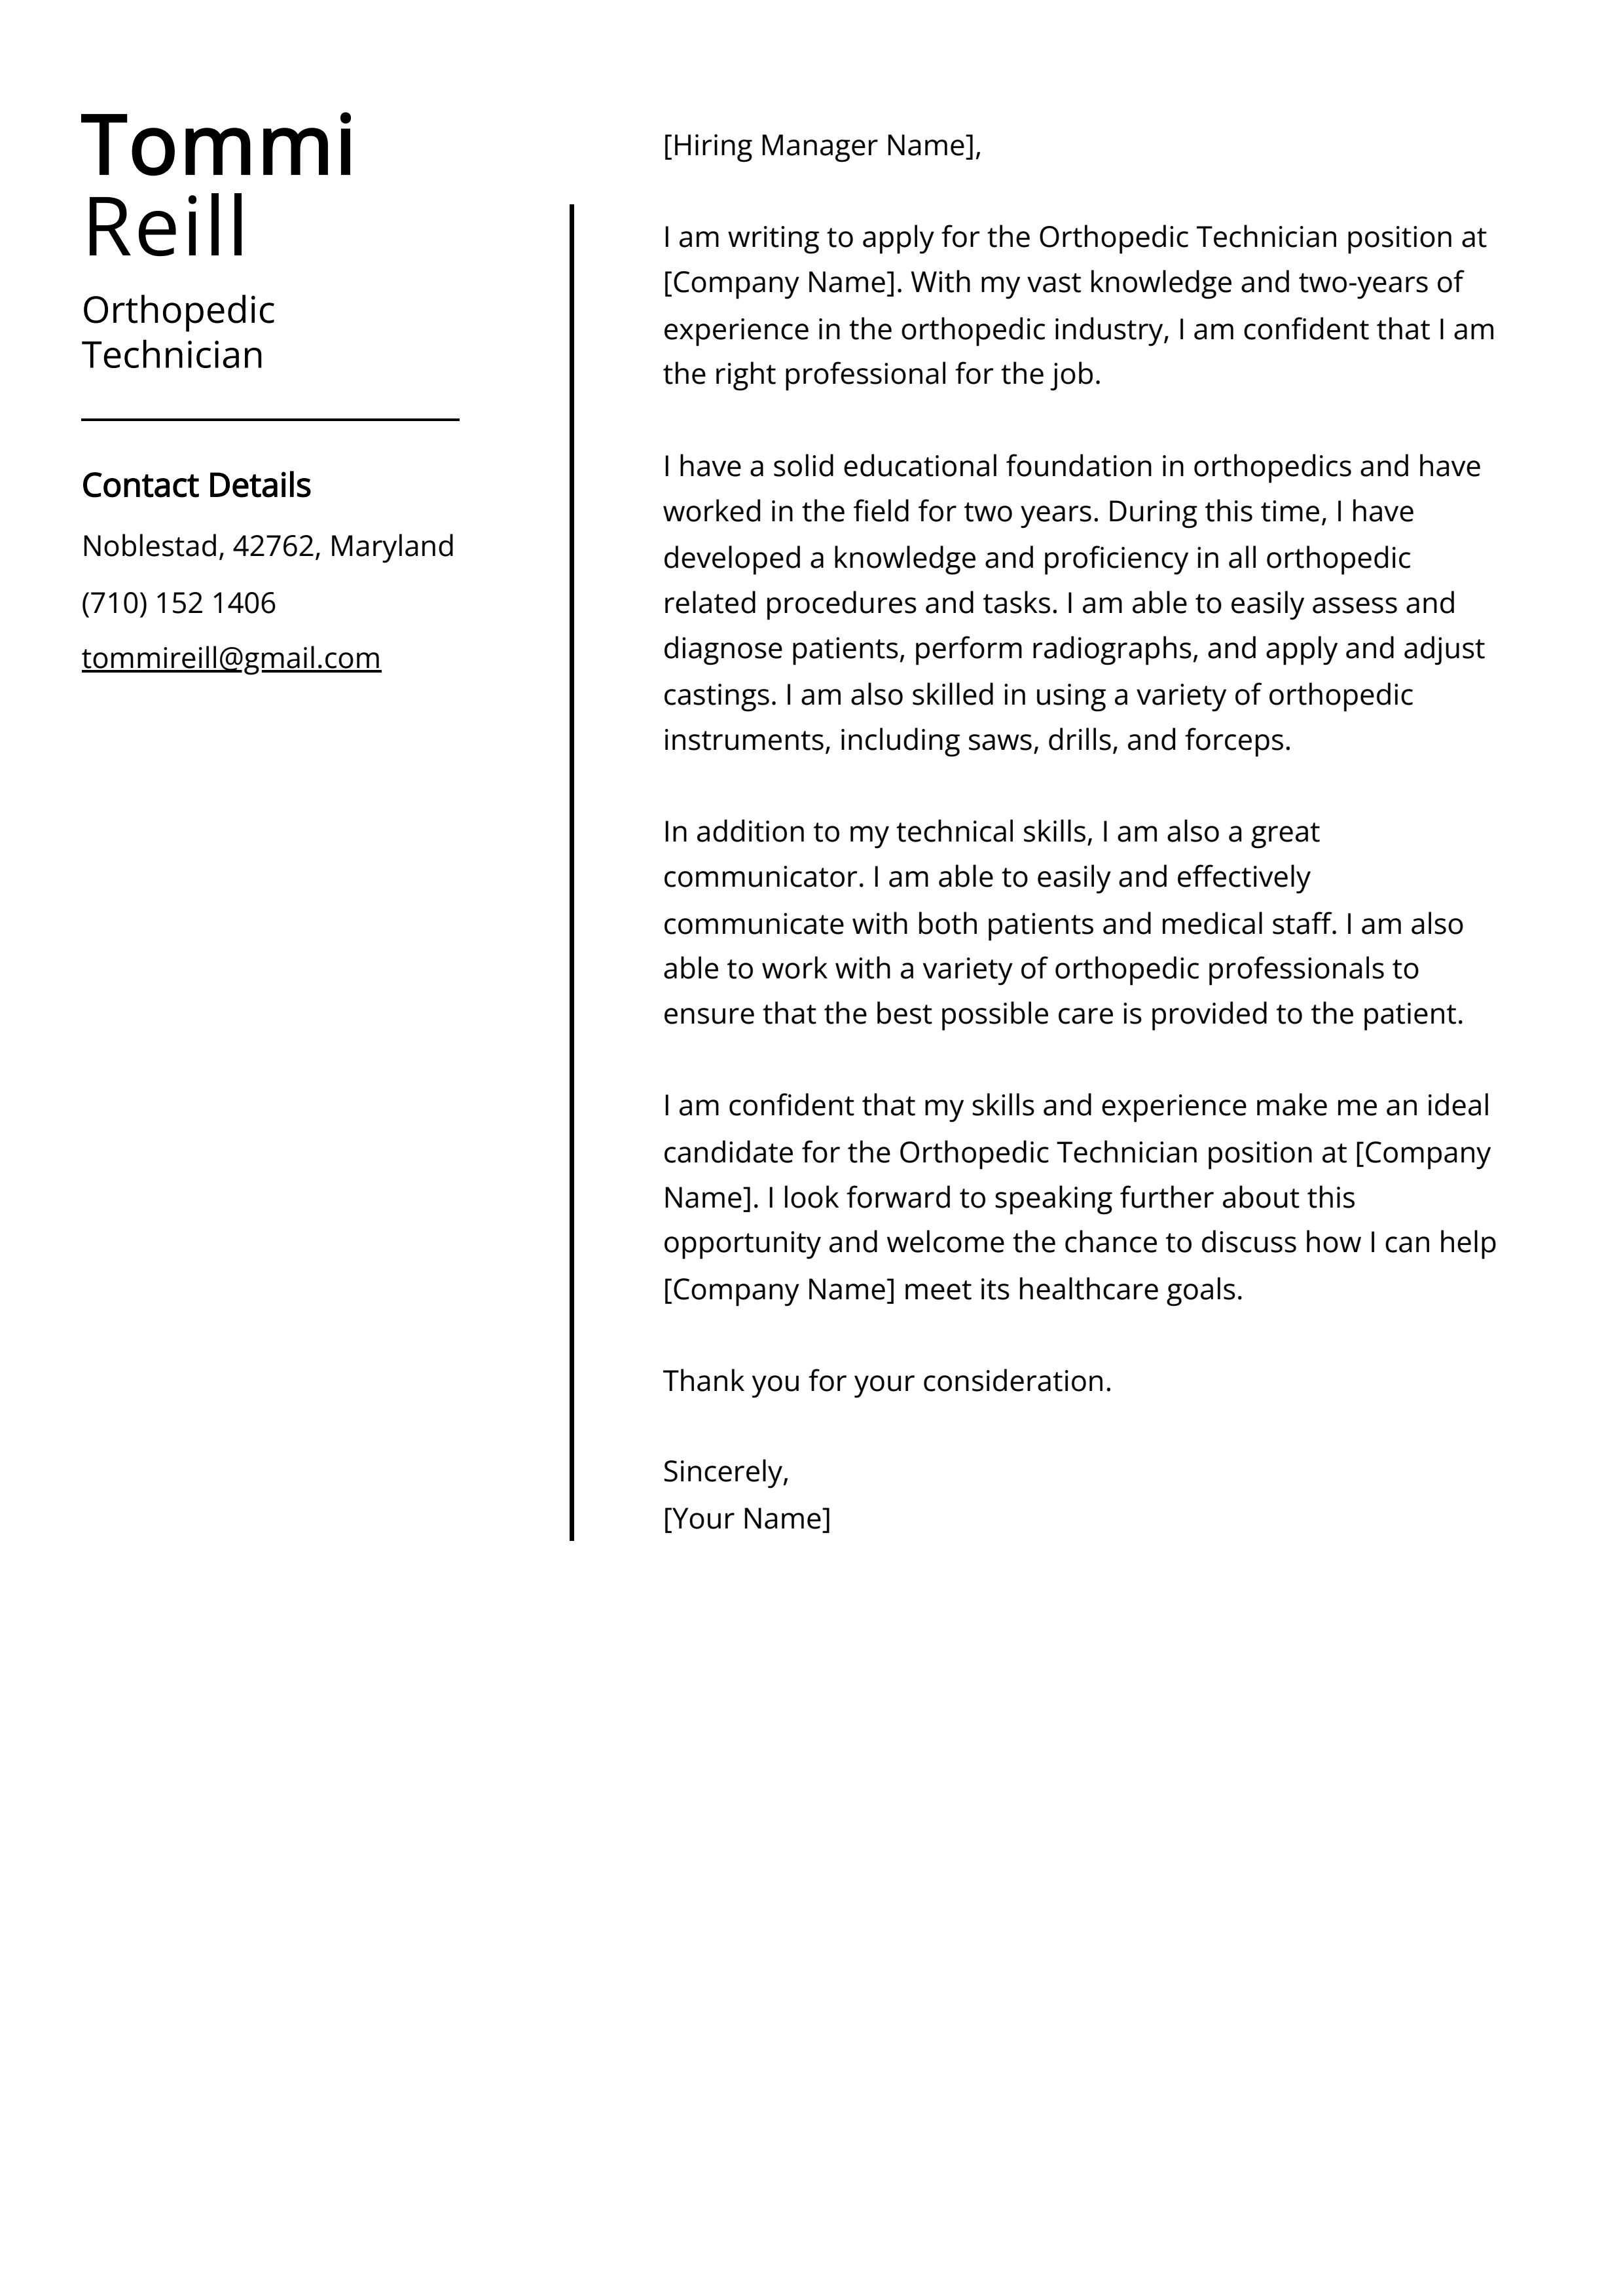 Orthopedic Technician Cover Letter Example